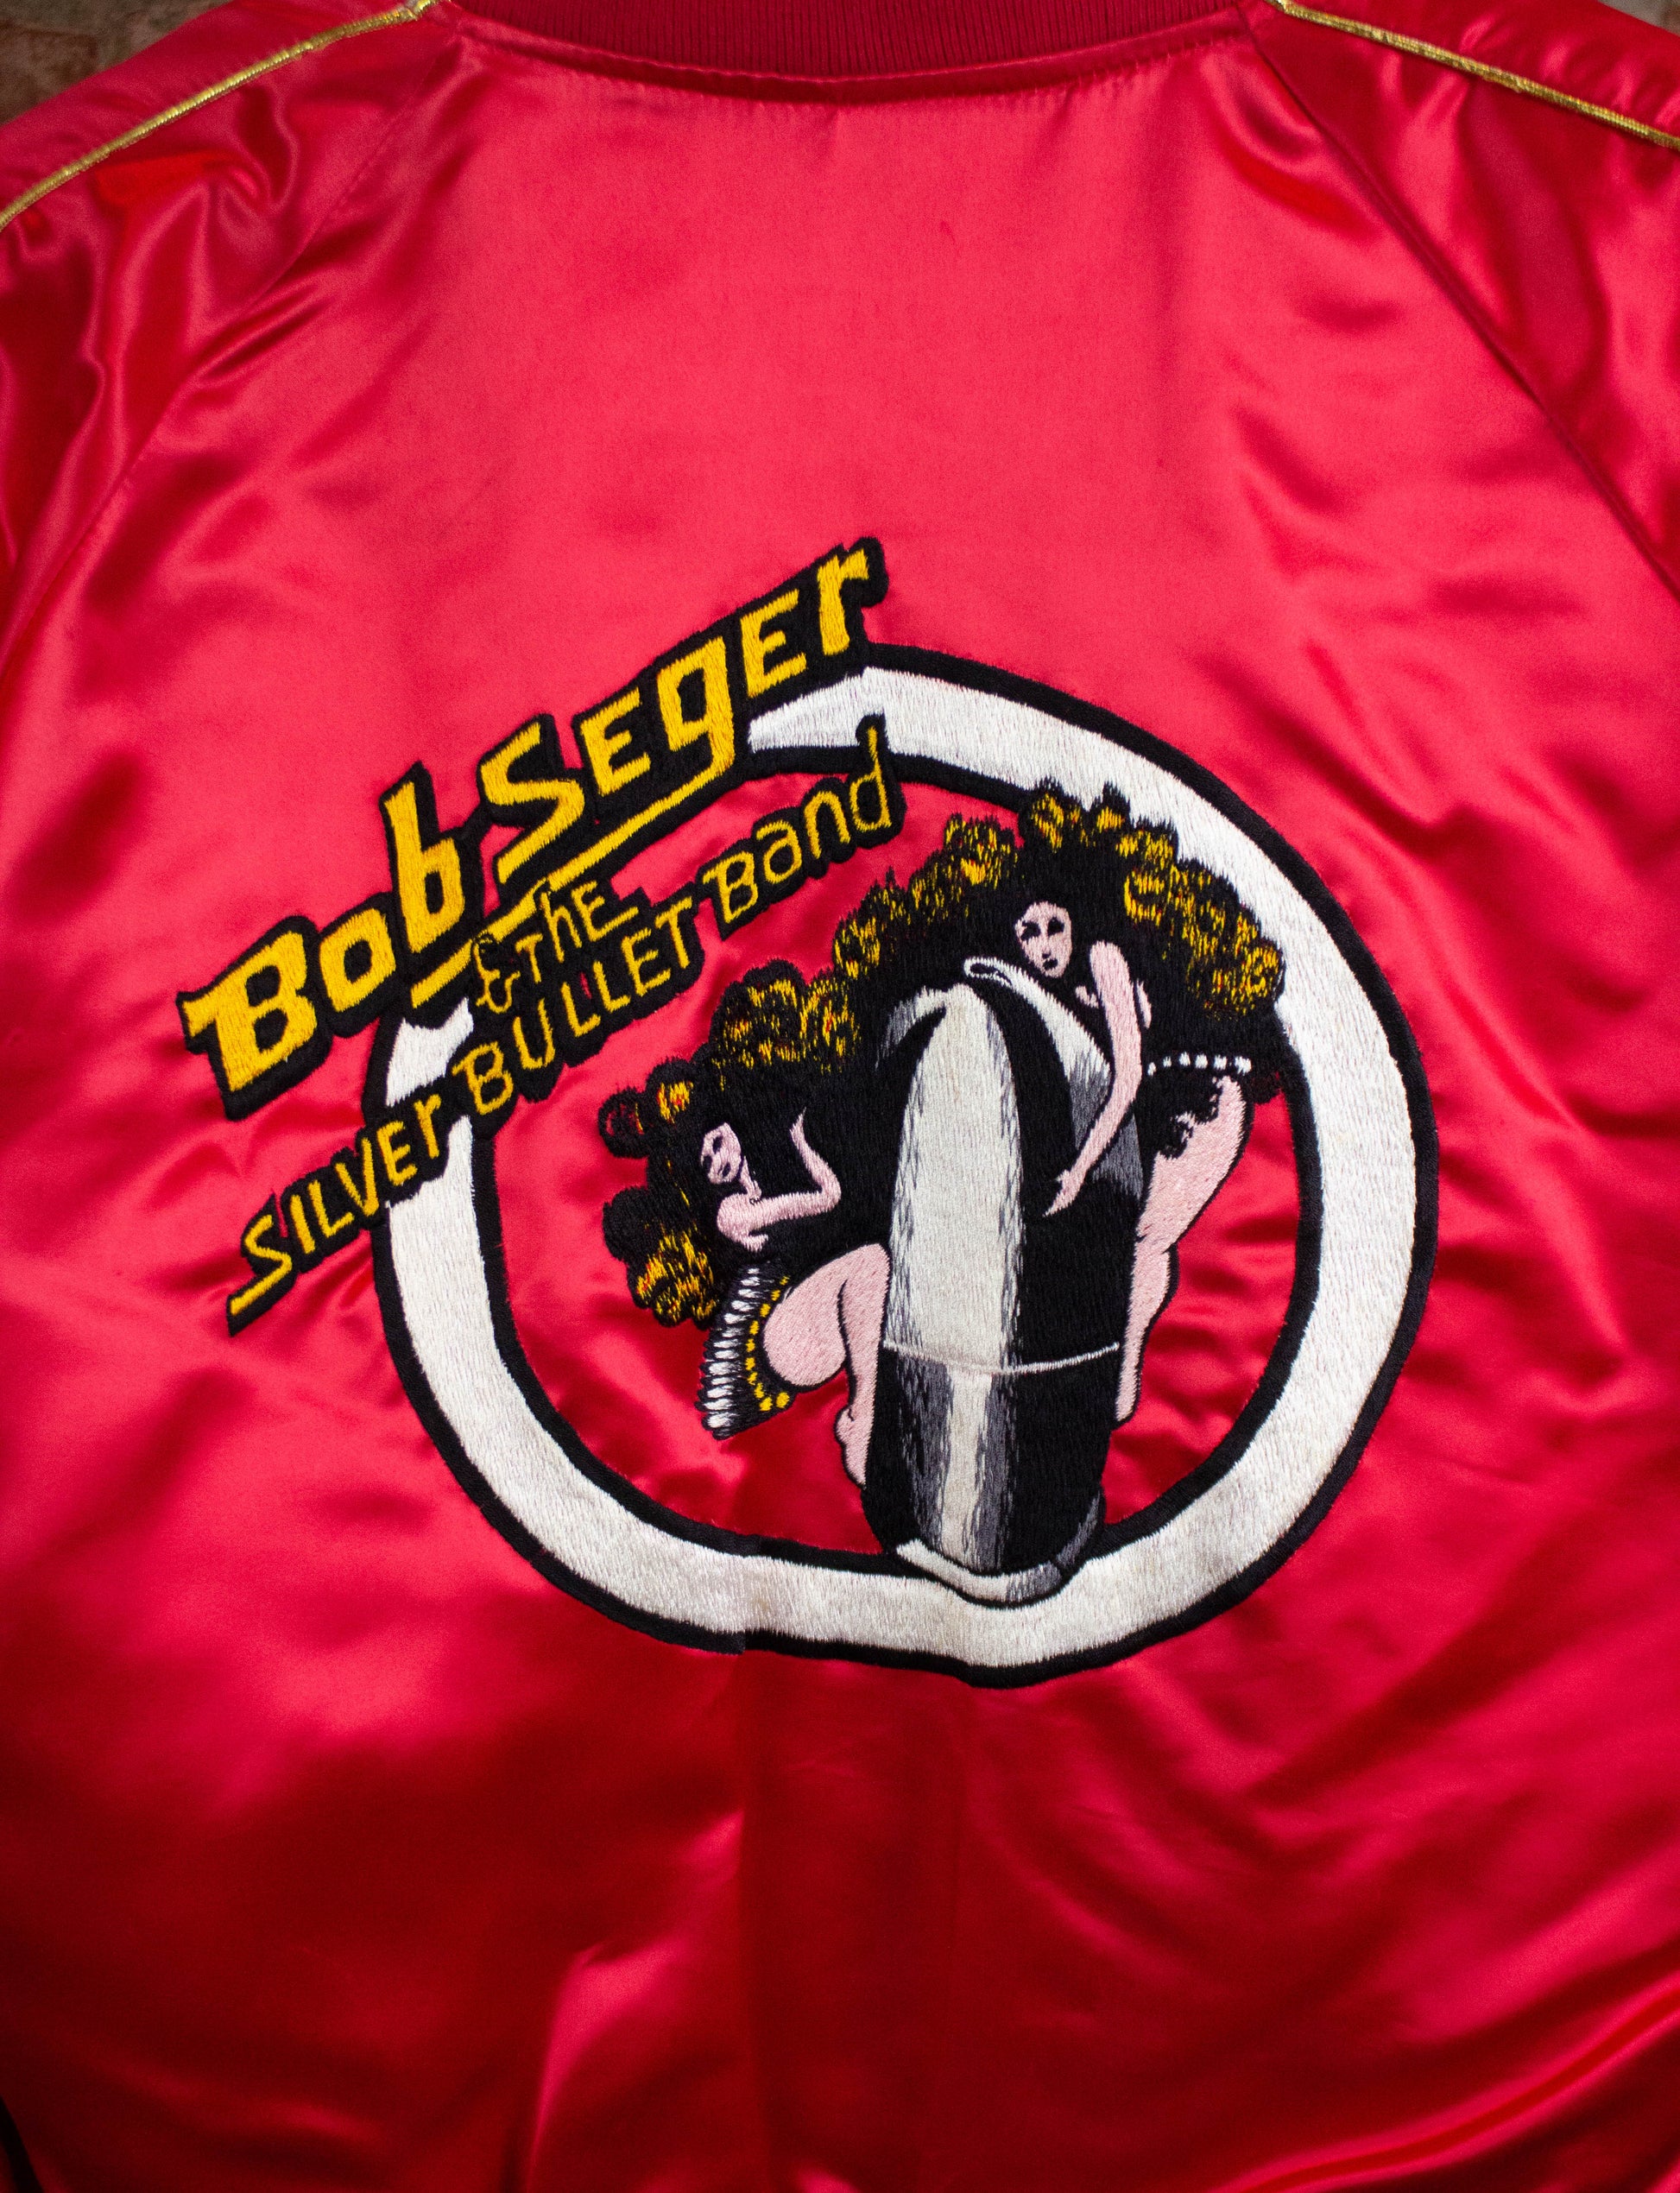 Vintage Bob Seger and the Silver Bullet Band 70s Tour Satin Bomber Jacket Red Medium